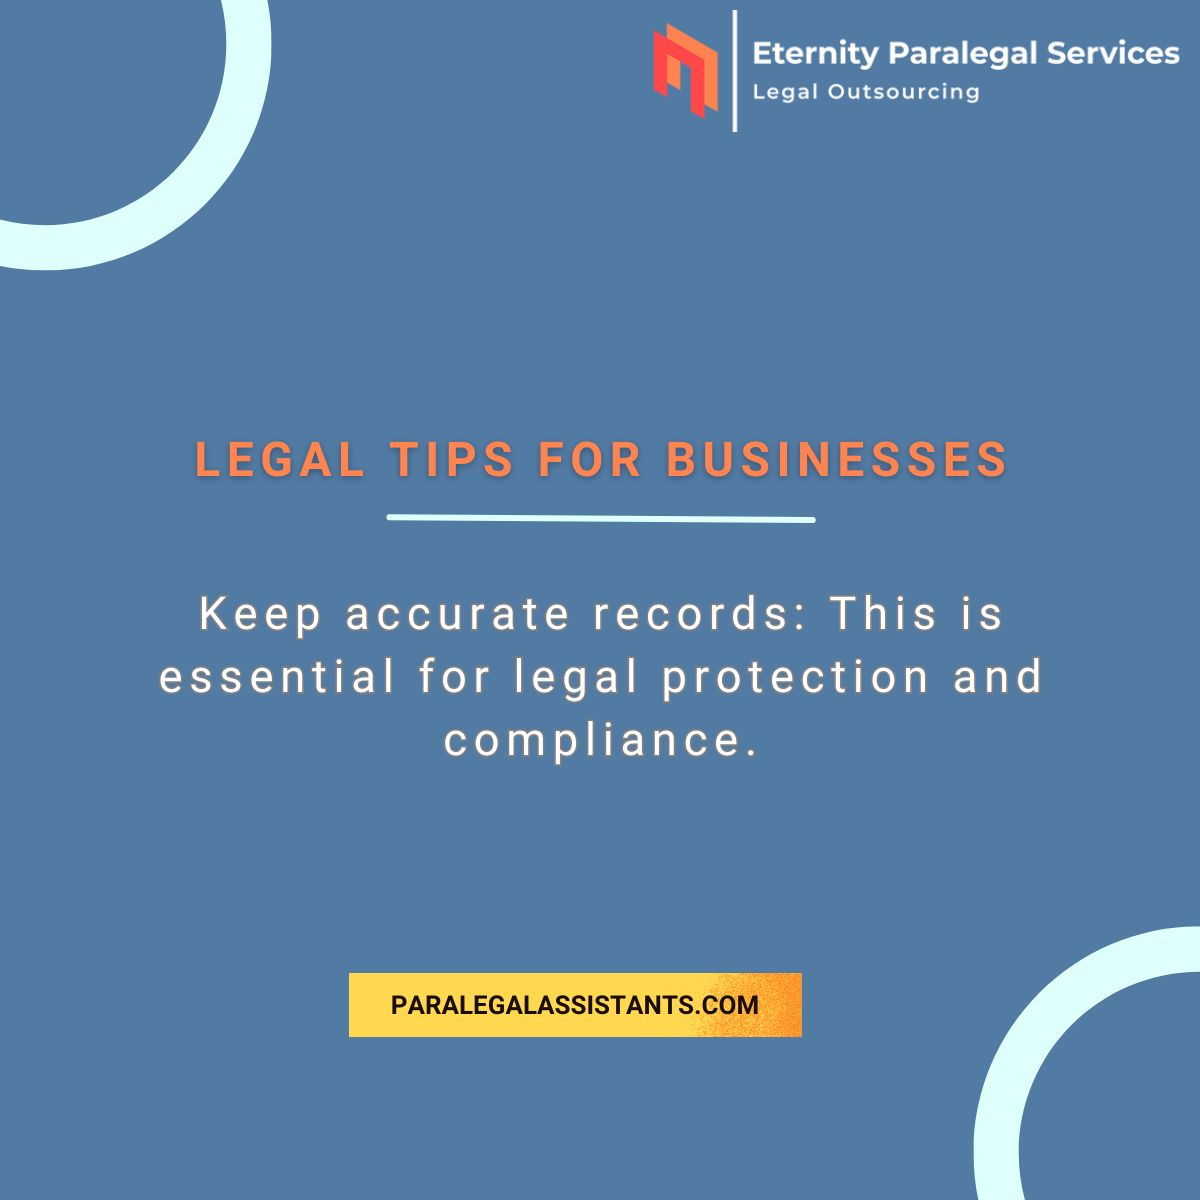 Unlock legal peace of mind for your business with invaluable tips! 💼✨ Keeping accurate records isn't just good practice—it's your shield against legal pitfalls and compliance issues. 

#LegalTips #BusinessCompliance #RecordKeeping #BusinessTips #EntrepreneurLife